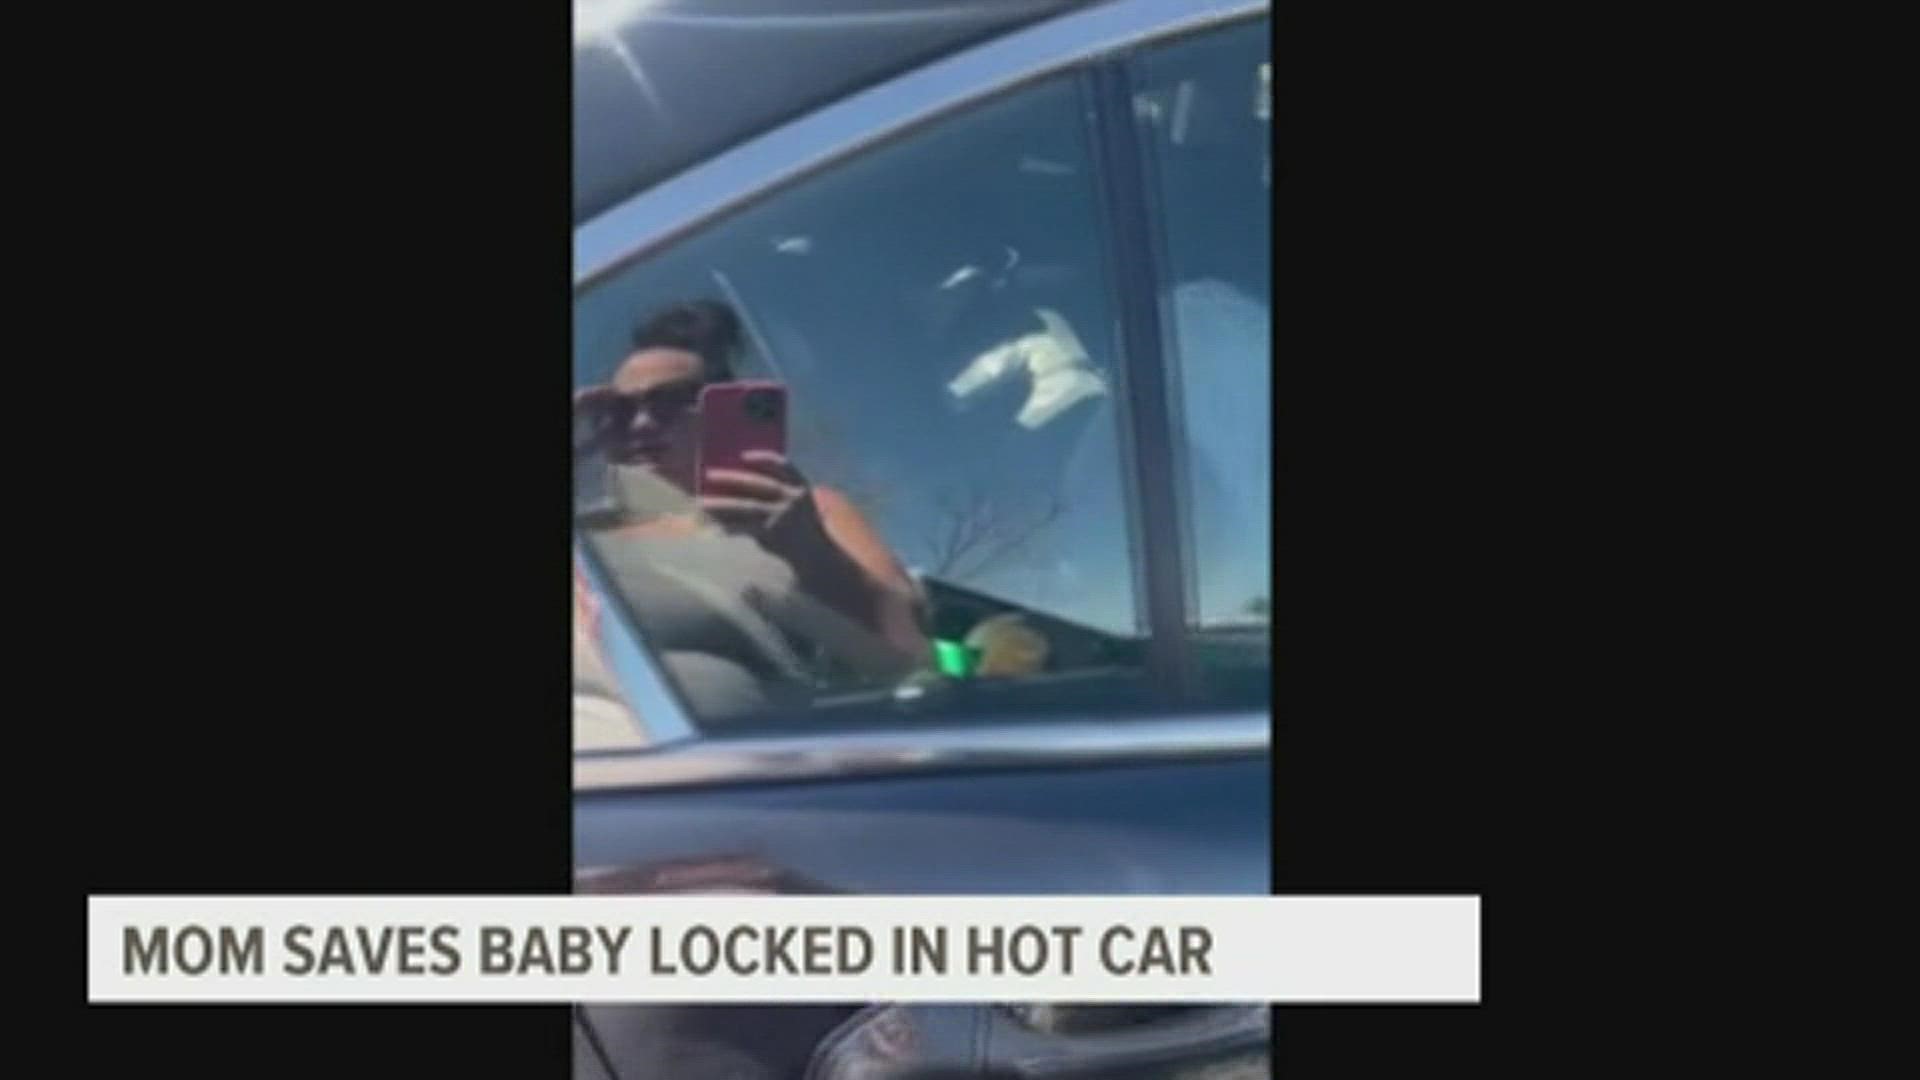 Megan Irish discovered the infant locked in a parked car with the windows rolled up outside the Walmart on West Kimberly on Father's Day.